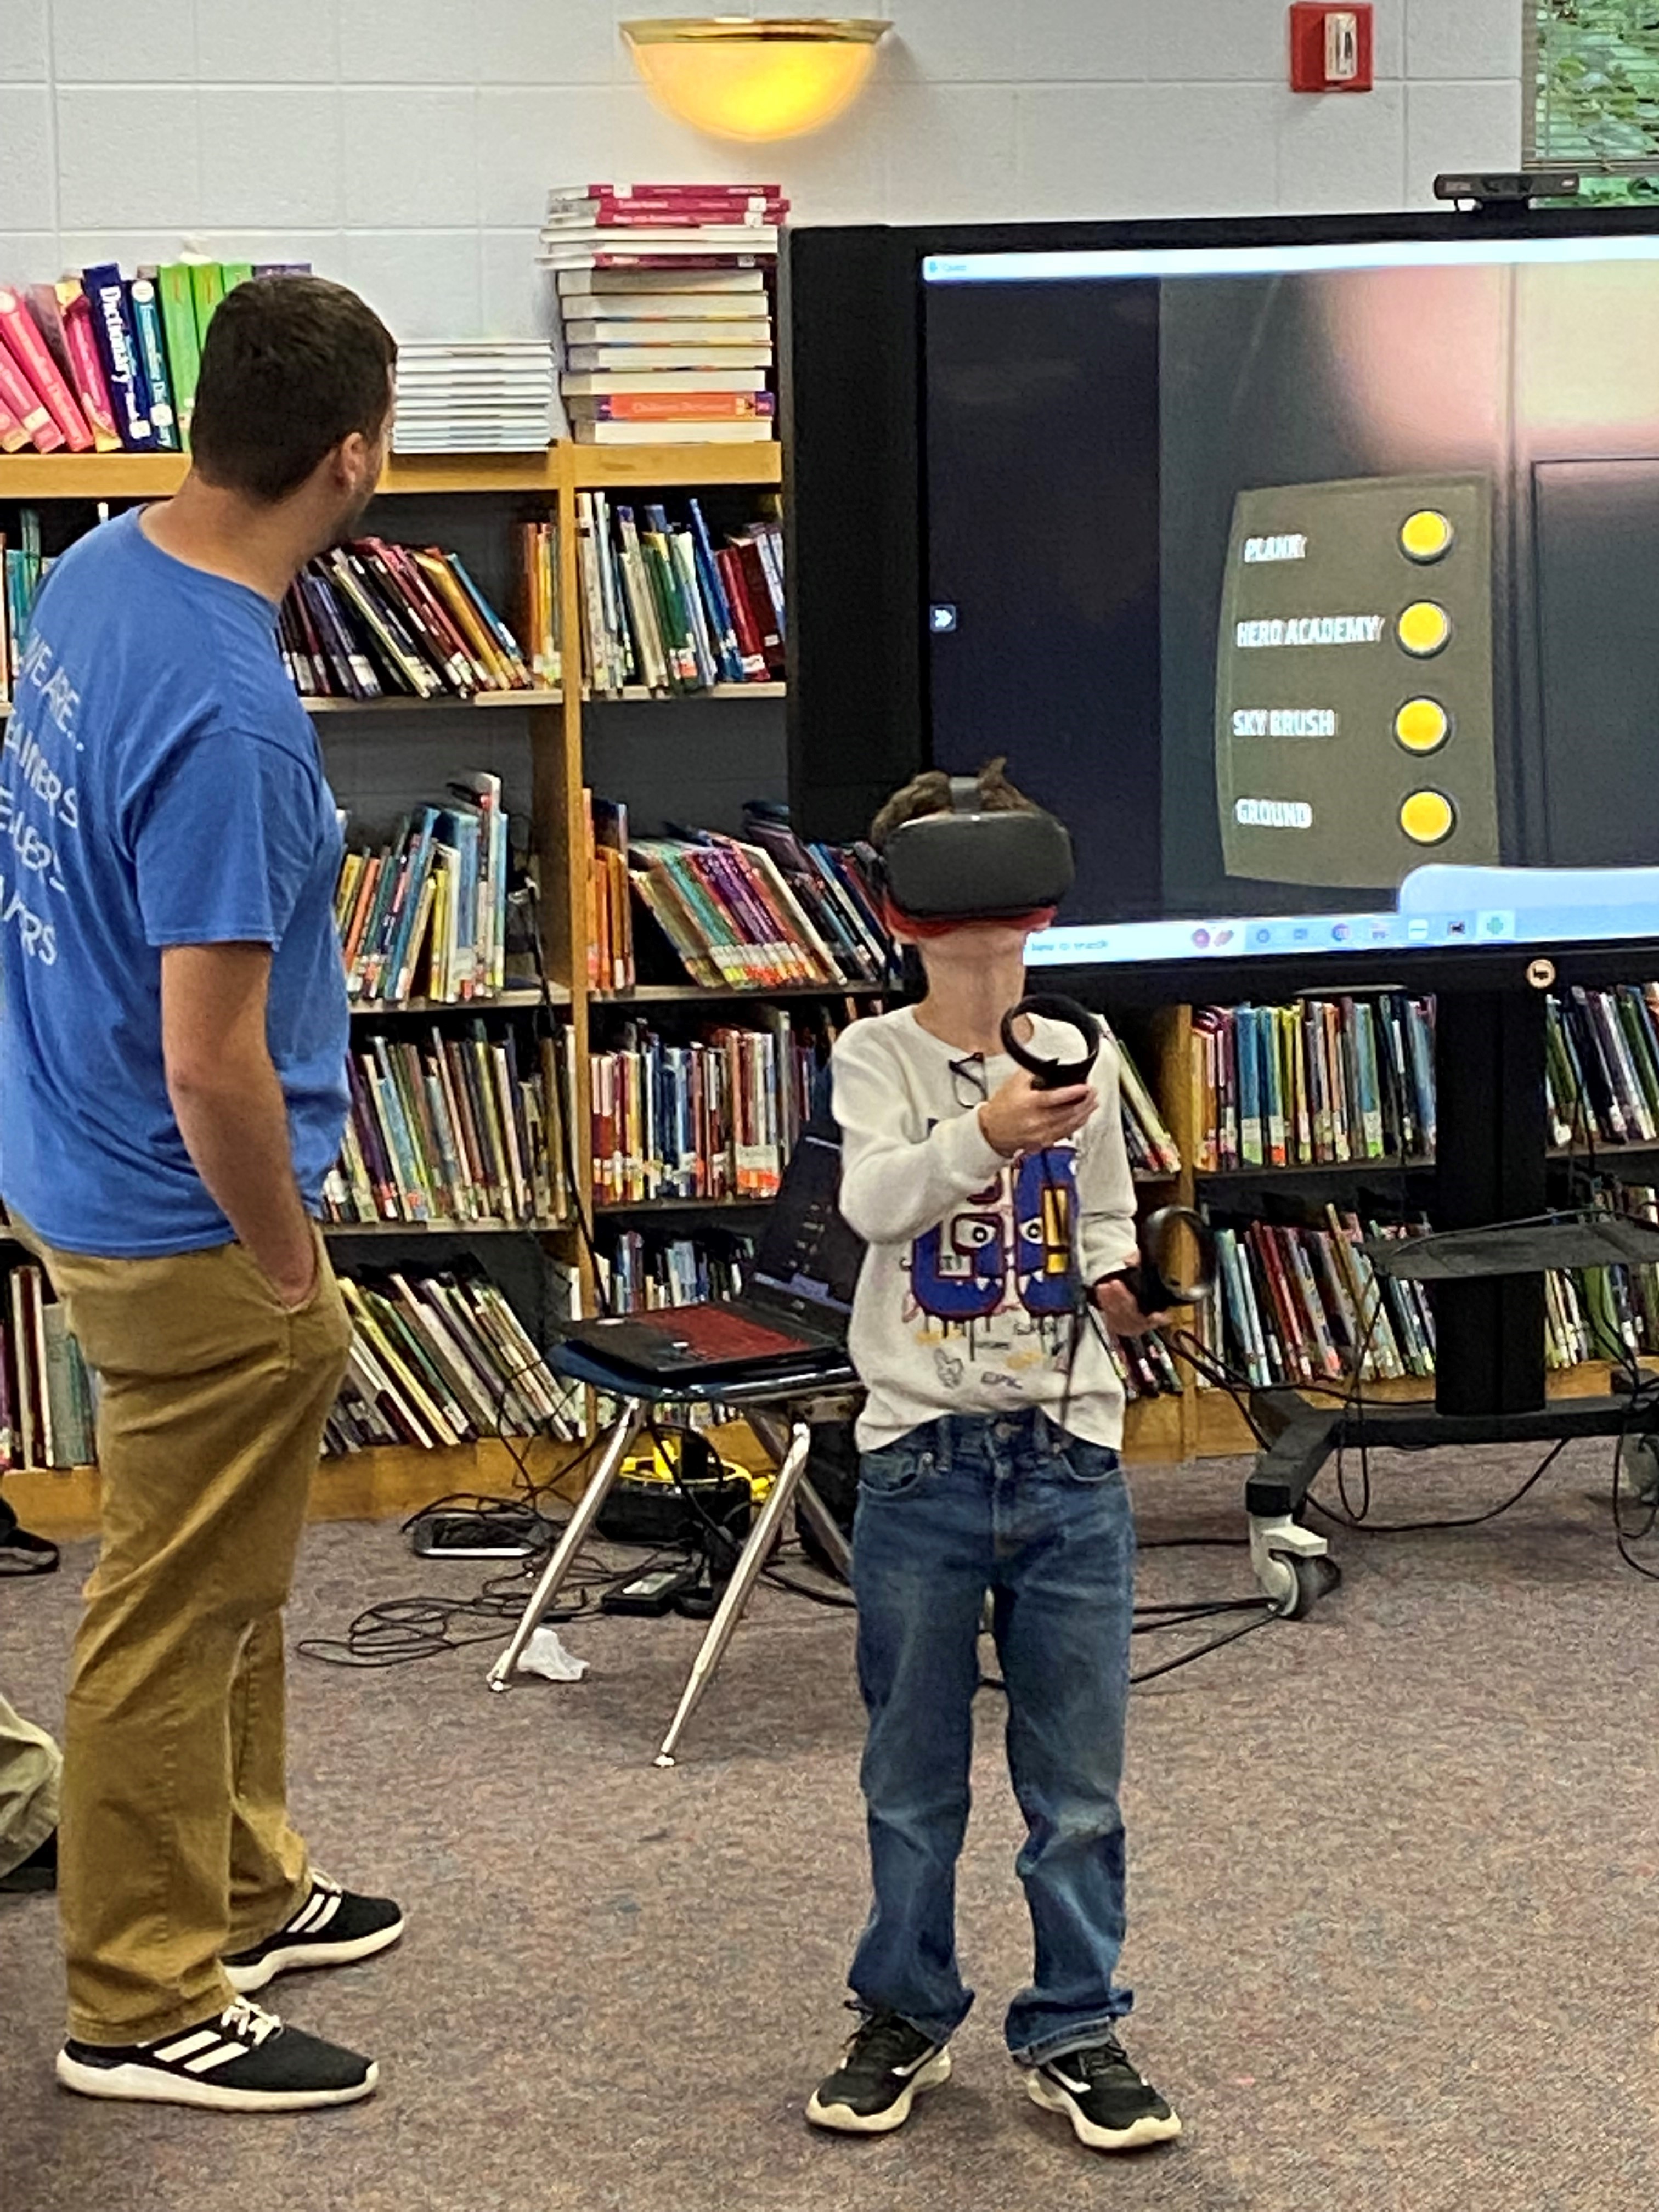 Students and staff experiencing virtual reality